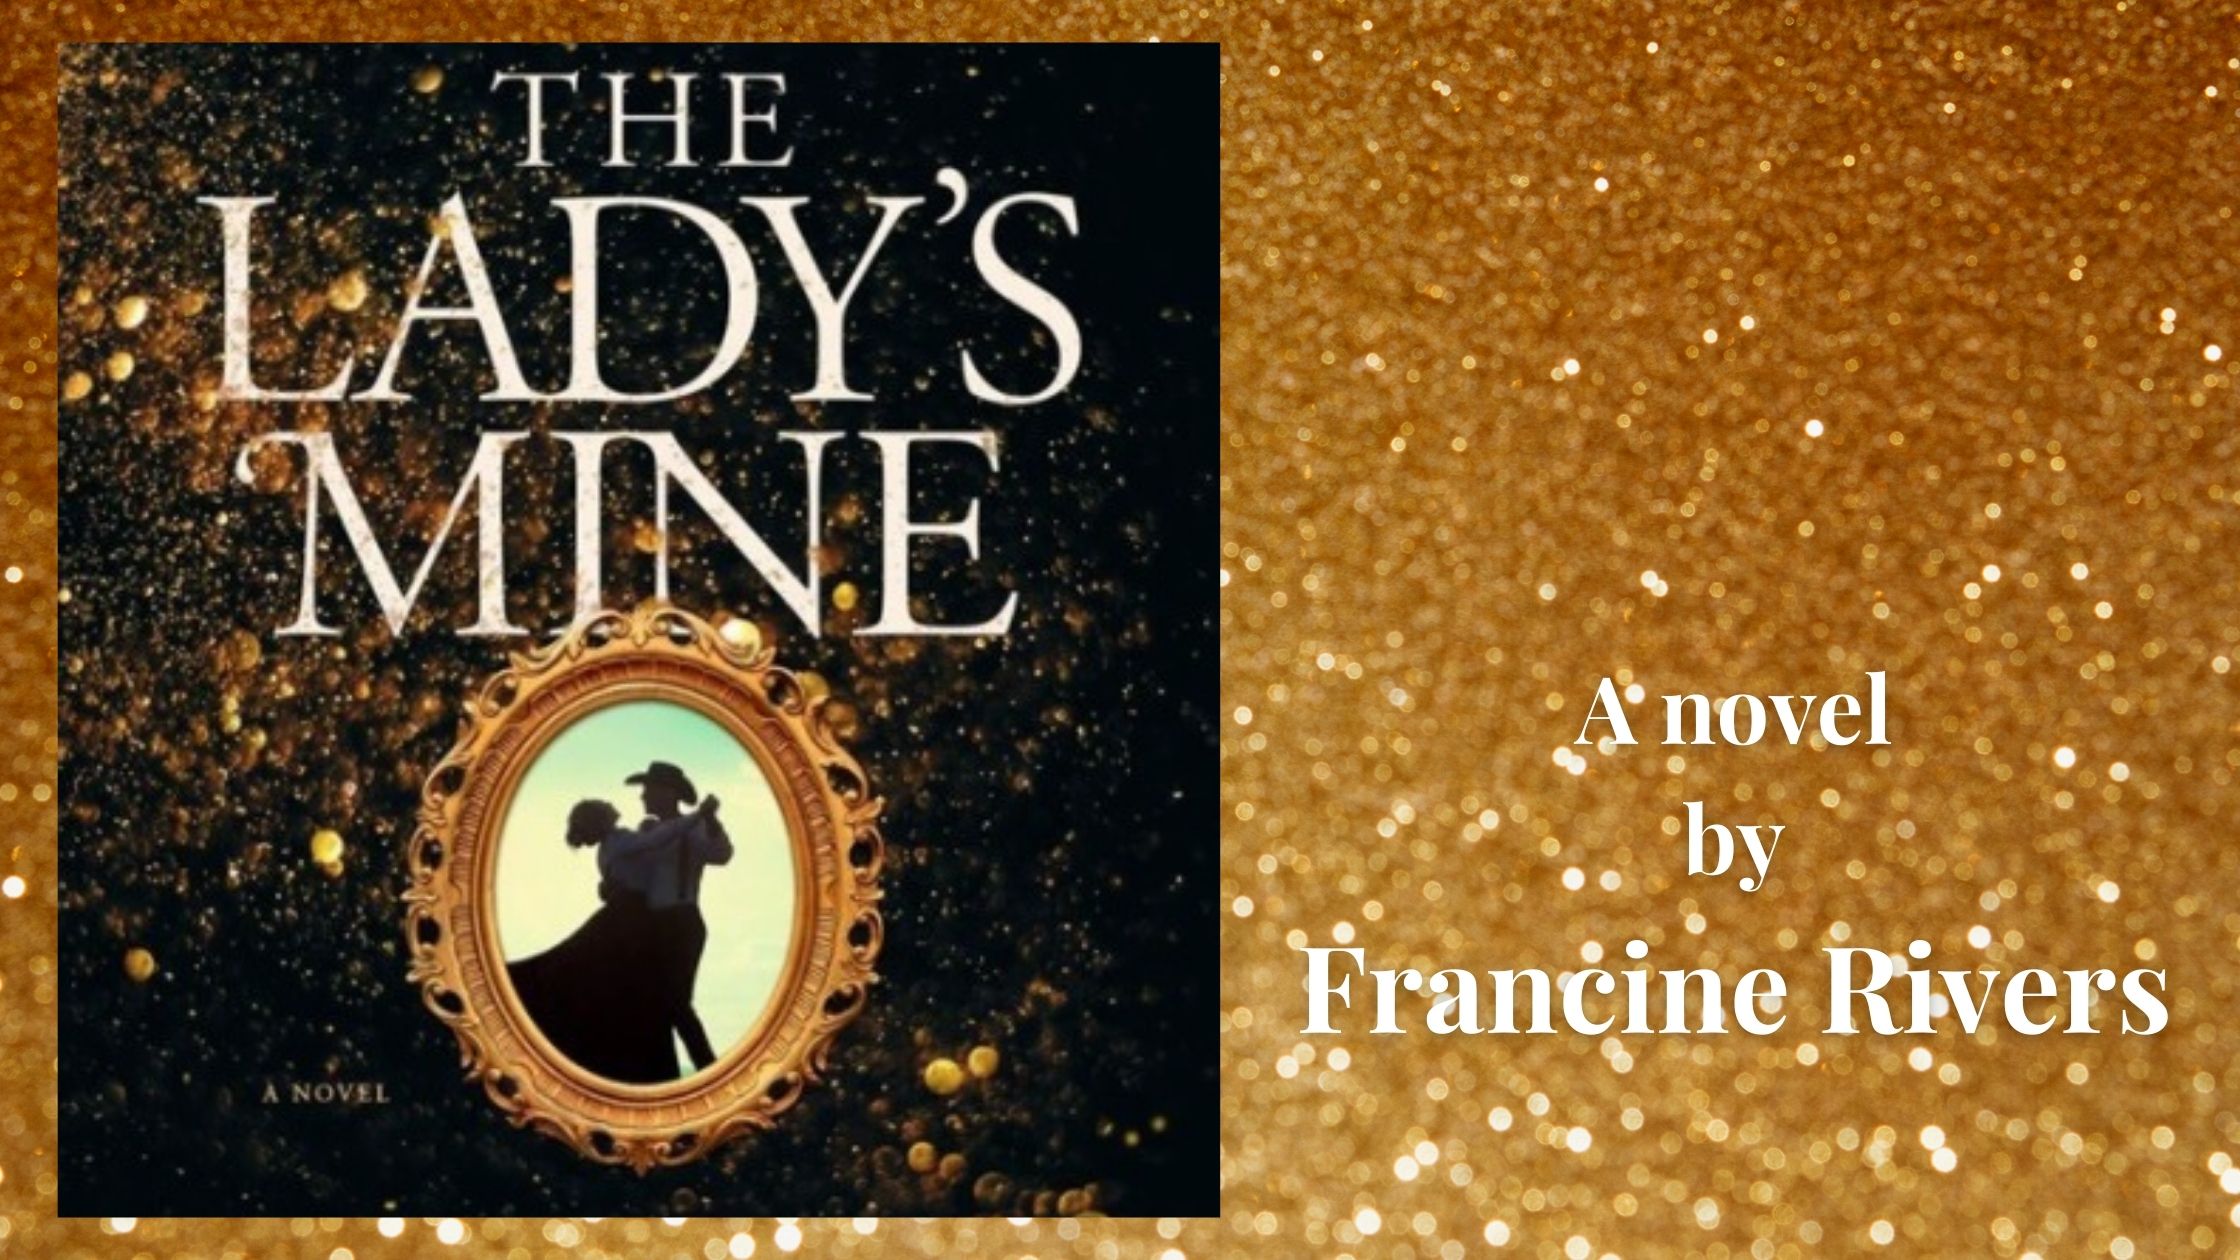 'The Lady's Mine' - the latest novel by Francine Rivers